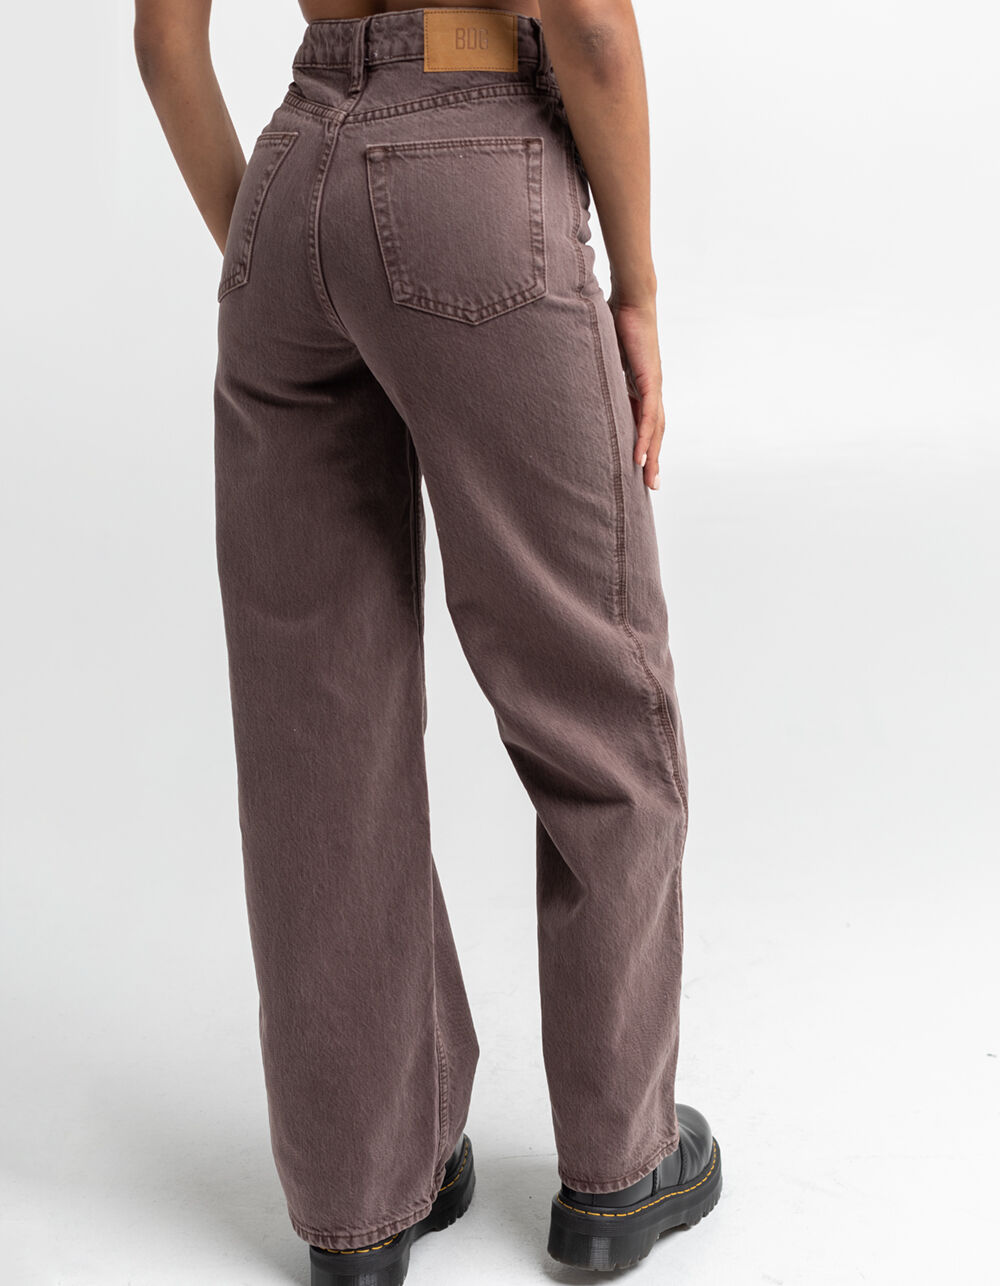 BDG Urban Outfitters Puddle Womens Jeans - BROWN | Tillys